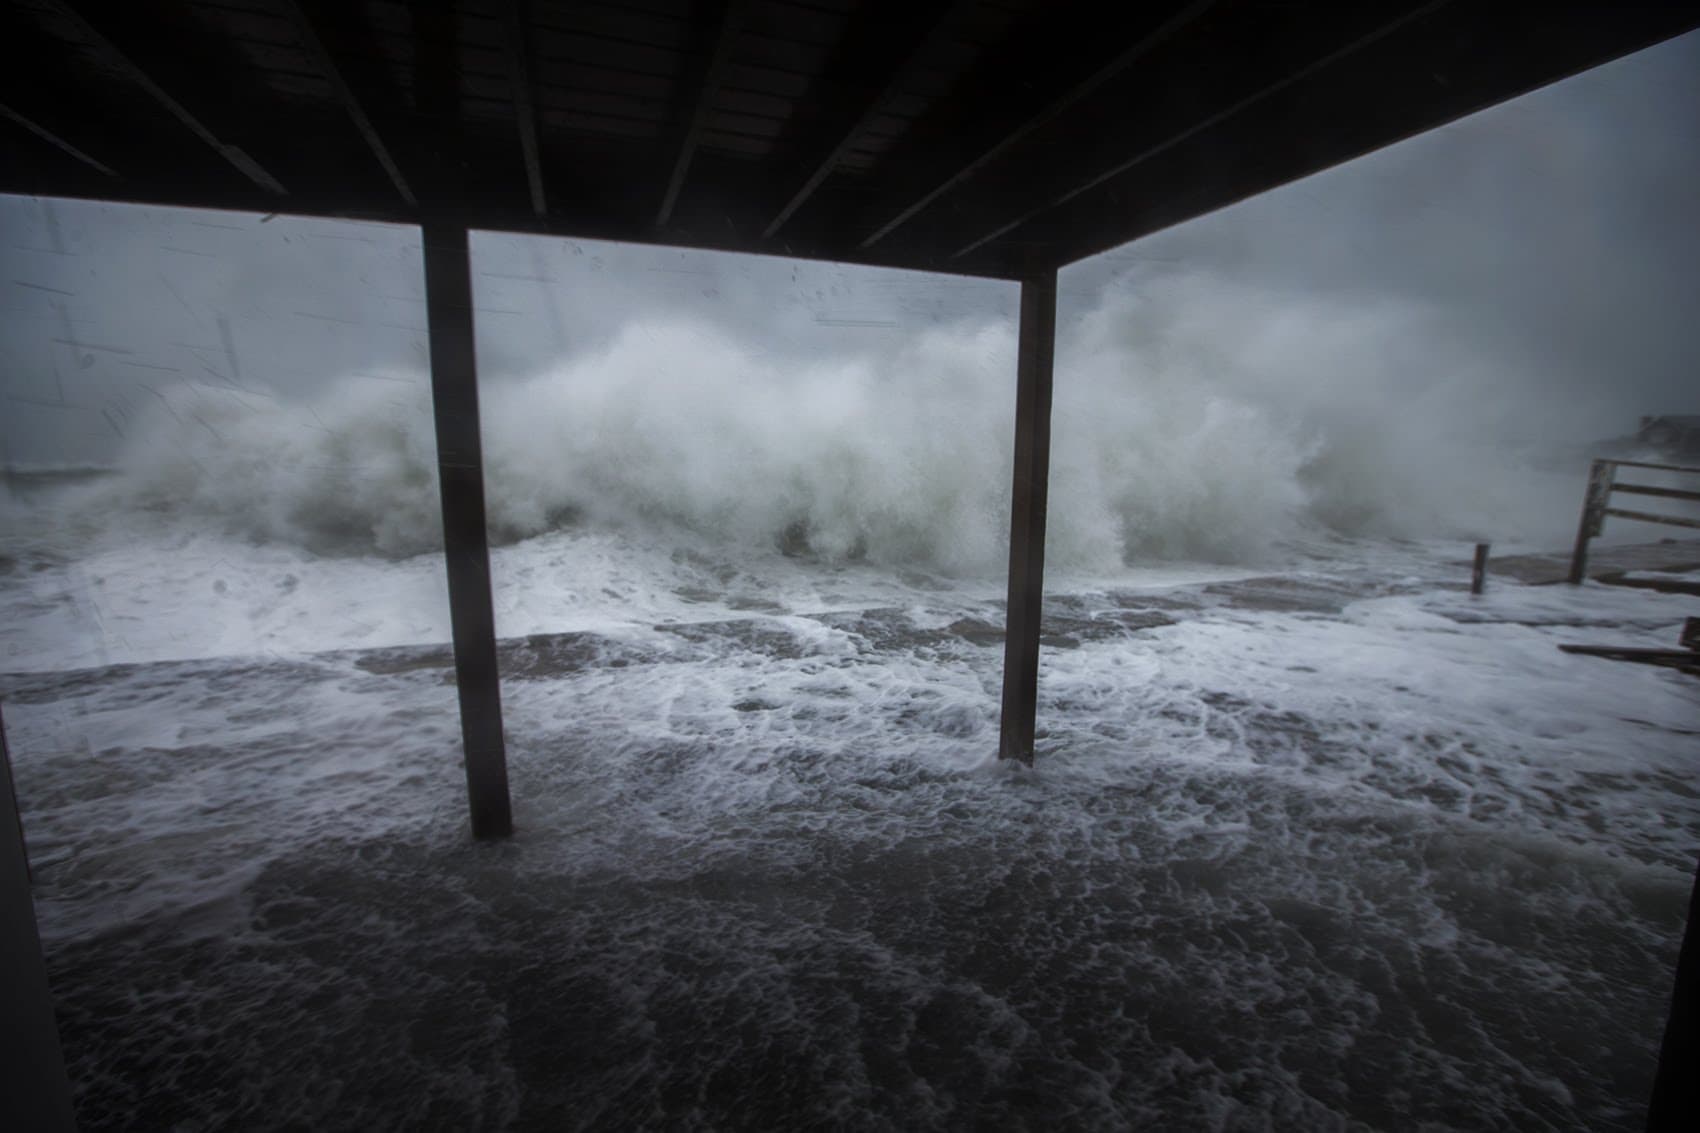 Waves crash along the seawall on Turner Road in Scituate. (Jesse Costa/WBUR)